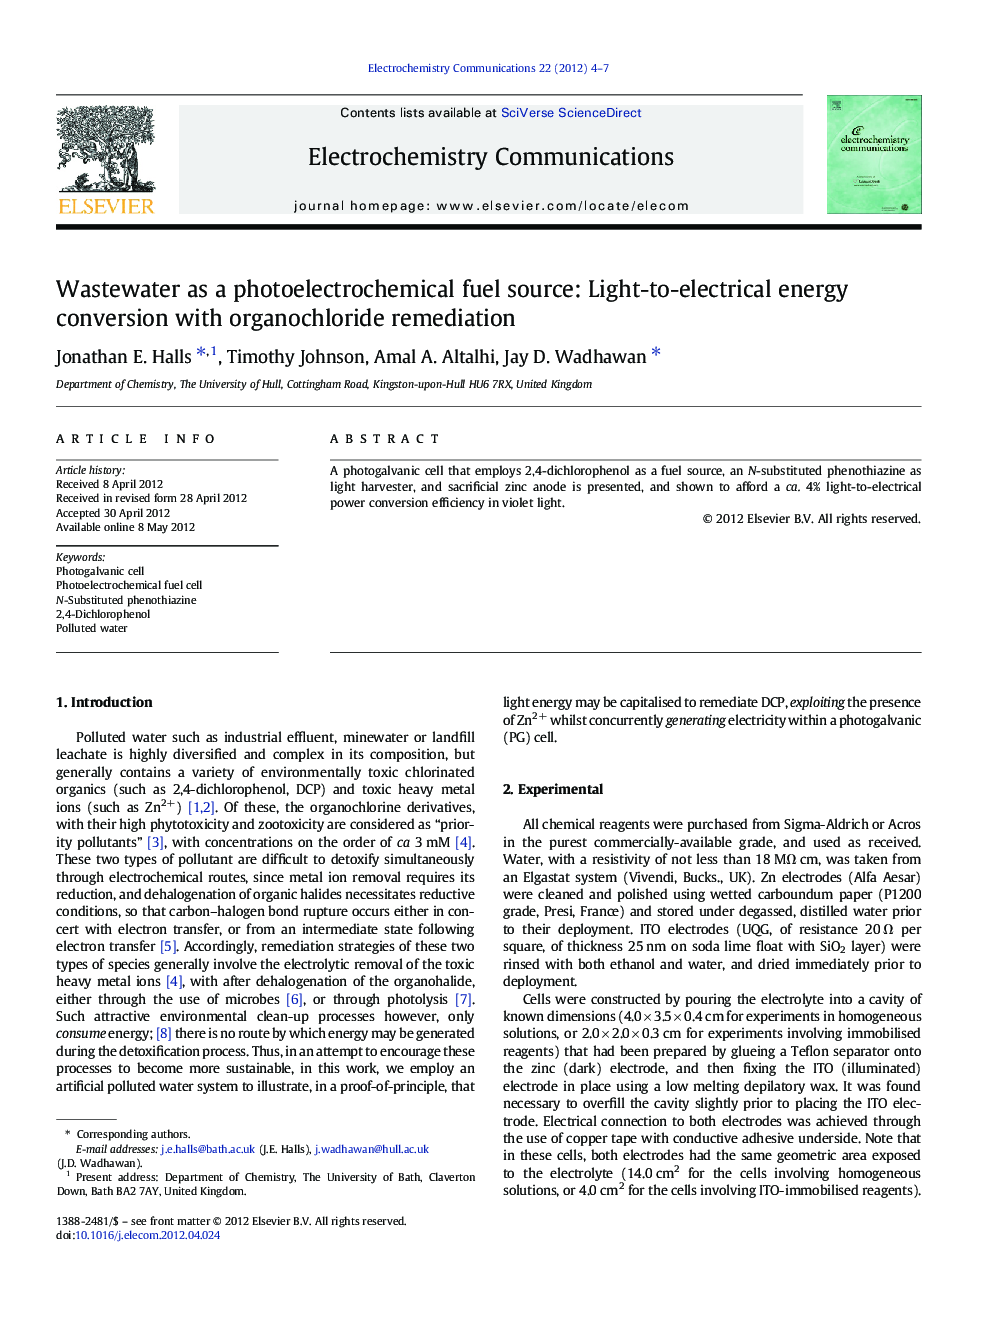 Wastewater as a photoelectrochemical fuel source: Light-to-electrical energy conversion with organochloride remediation